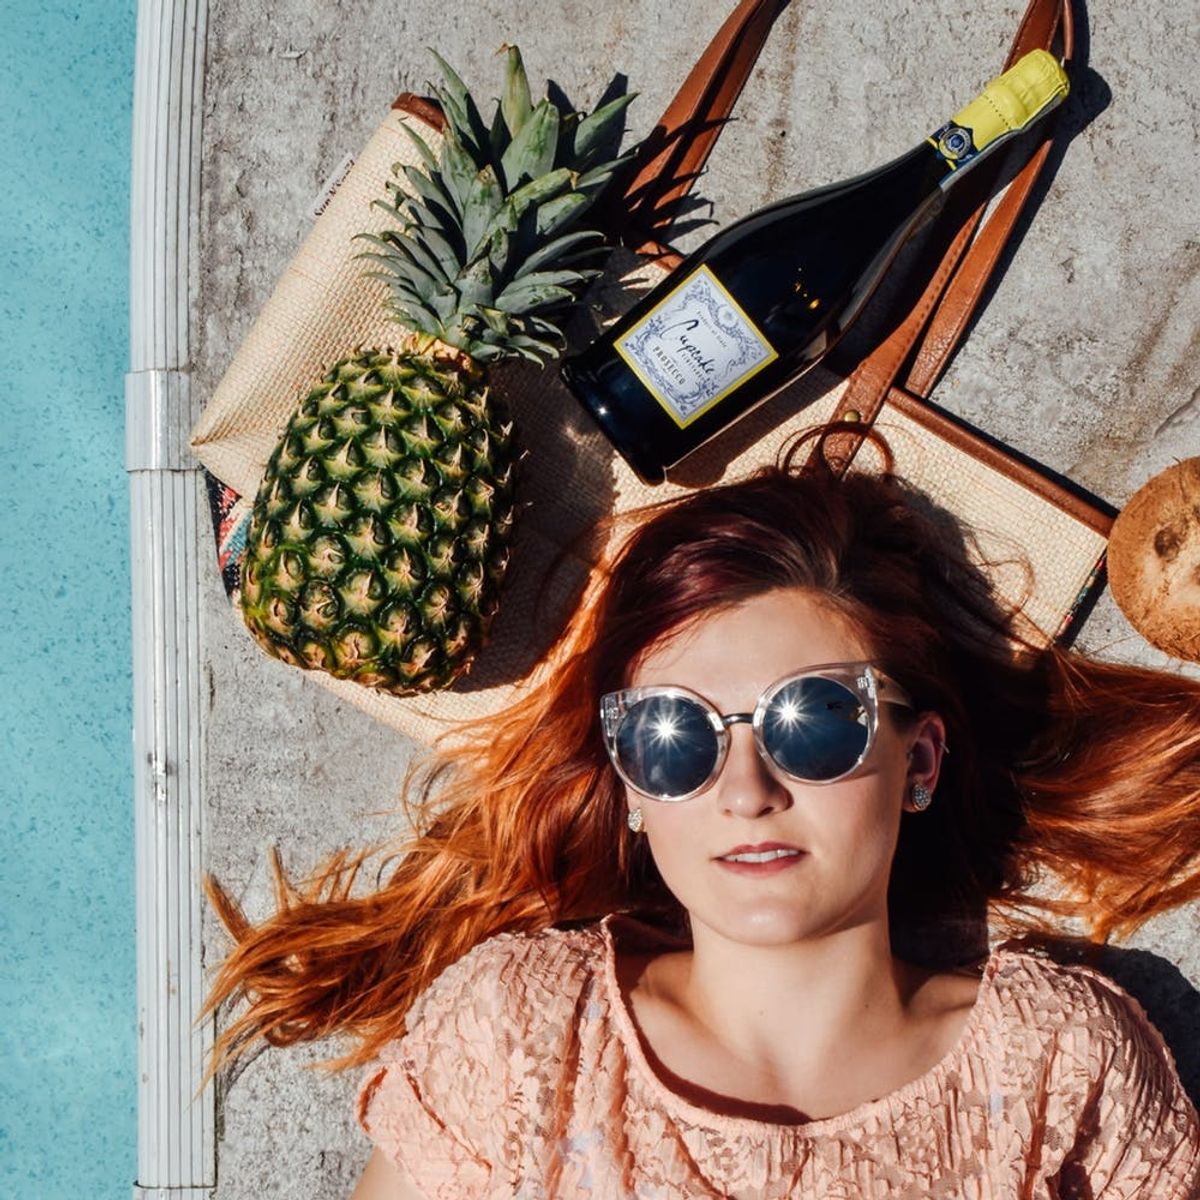 How to Bring Coachella Vibes to Your Next Cocktail Party (+ Win Tickets to the Biggest Music Festival of the Year!)